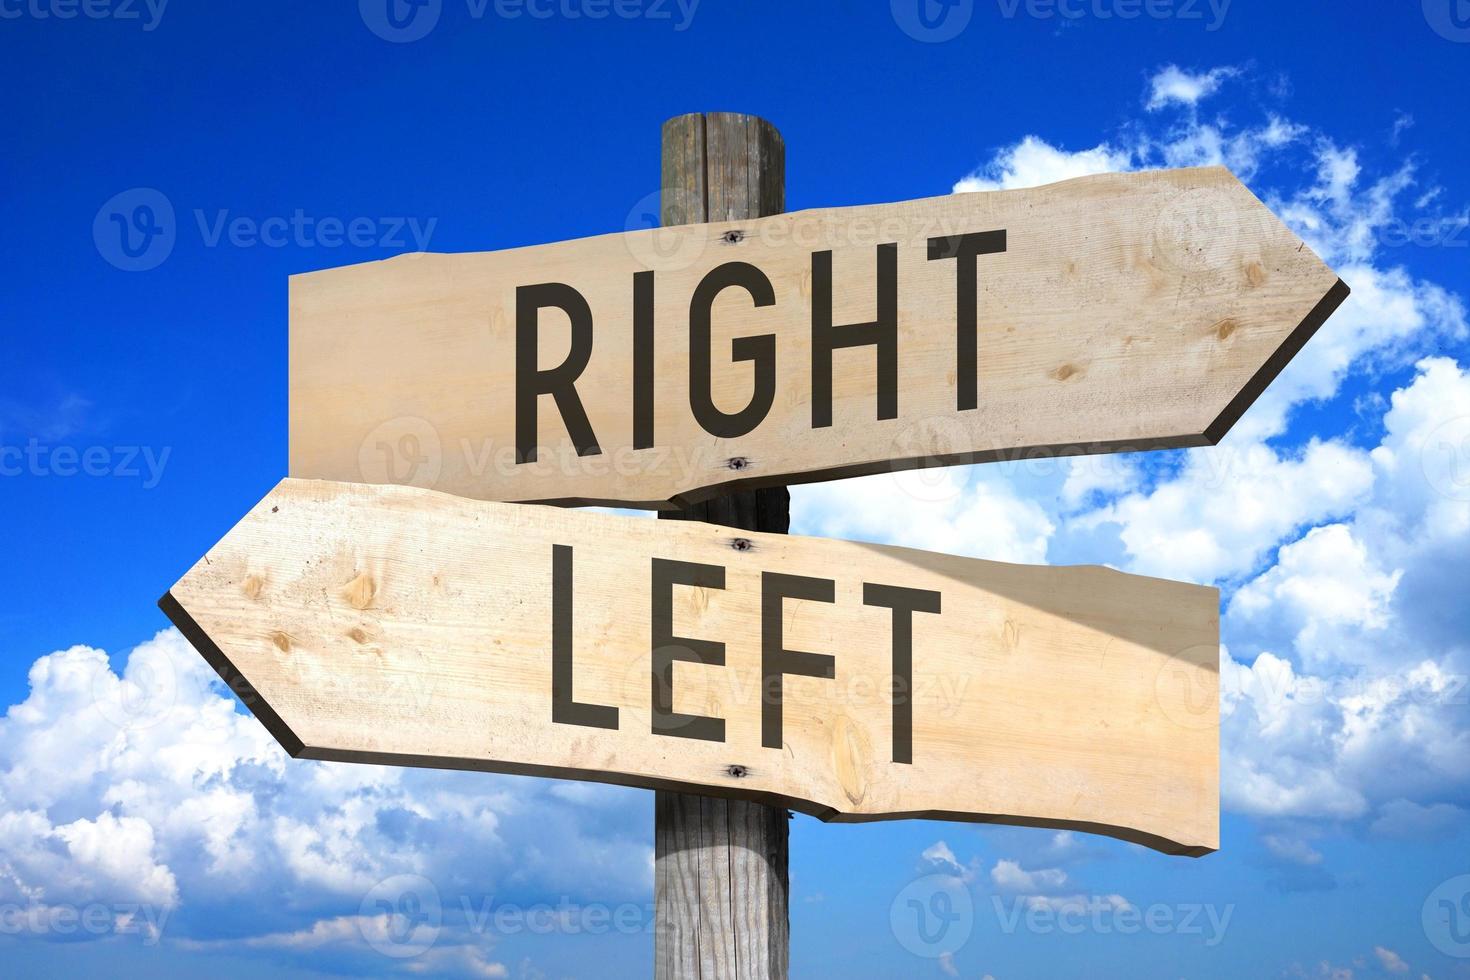 Right, Left - Wooden Signpost with Two Arrows, Sky with Clouds in Background photo